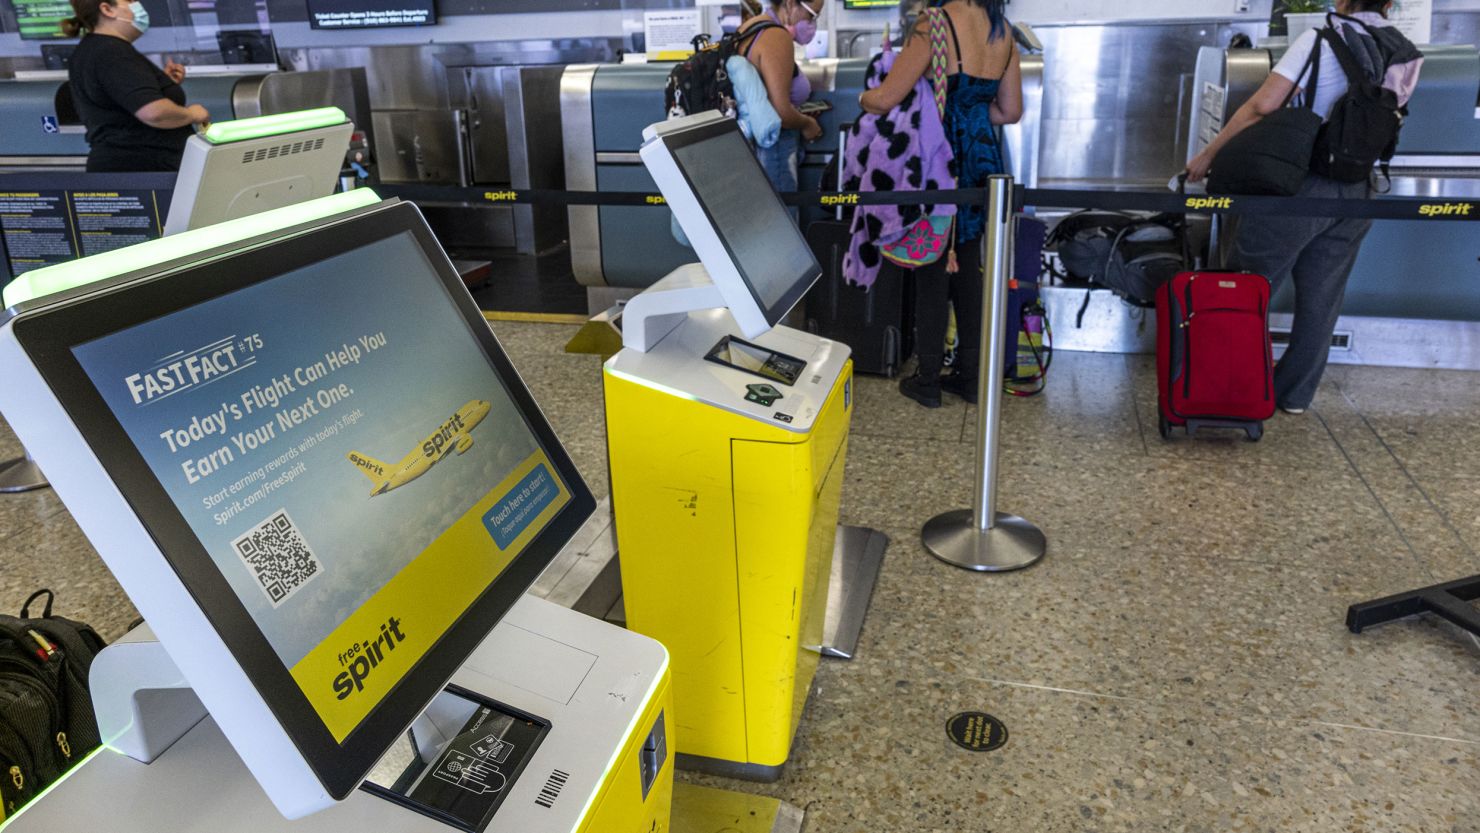 Spirit Airlines self check-in kiosks are pictured at the Oakland International Airport in Oakland, California, Tuesday, June 21, 2022.